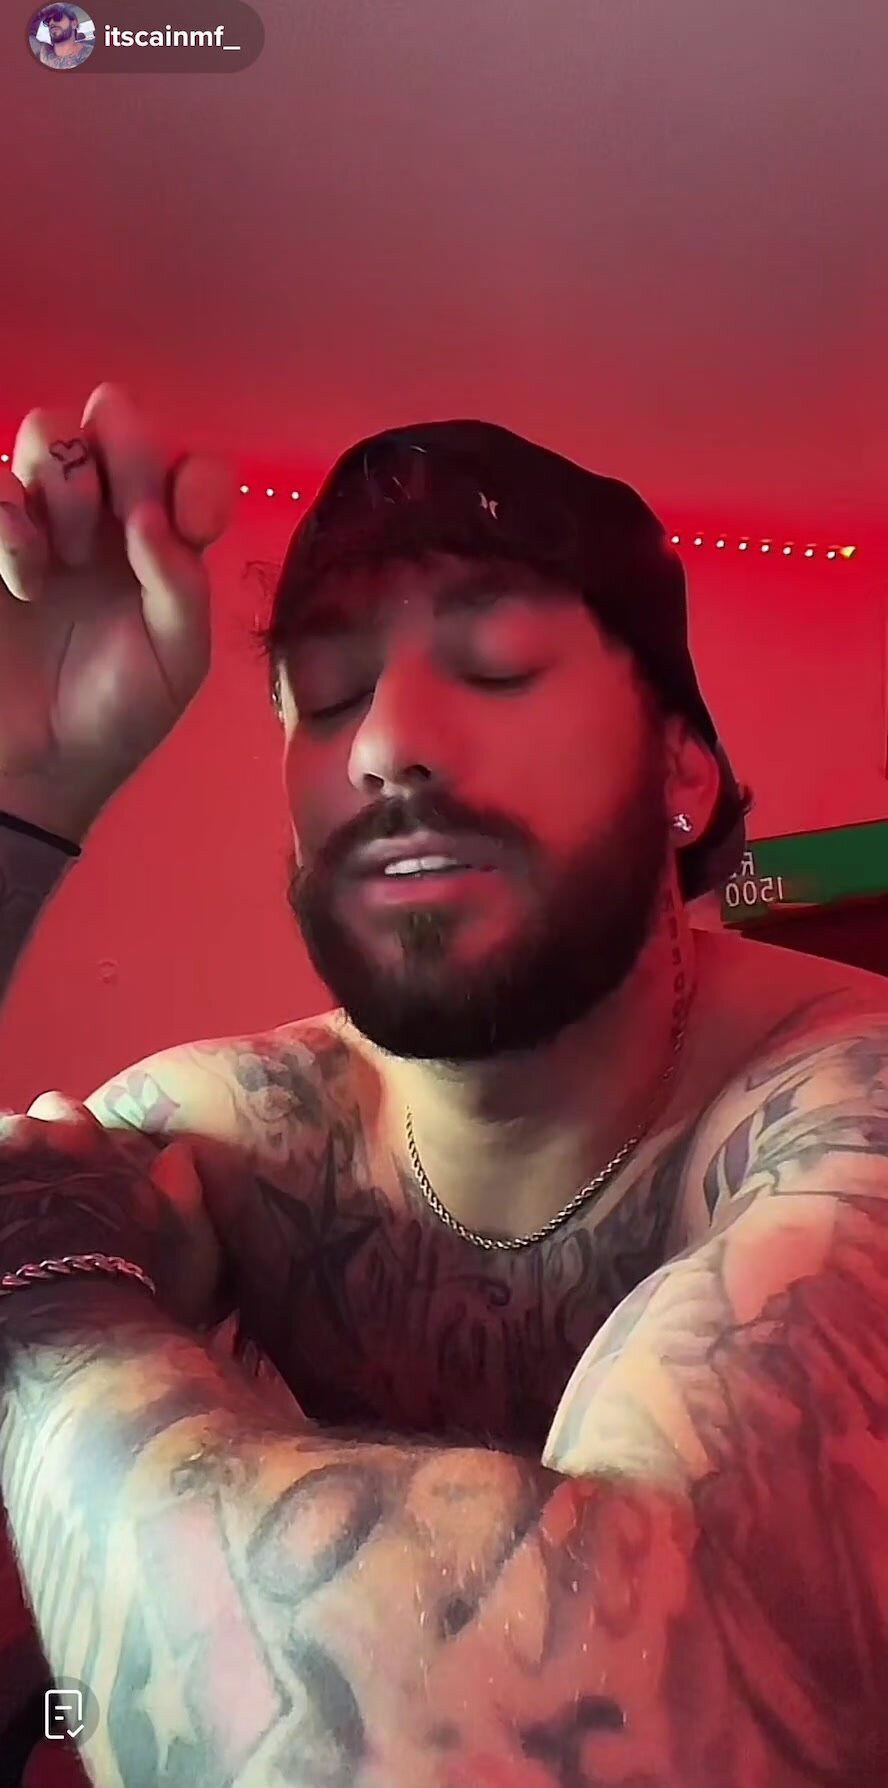 "showing his tattoos" on live